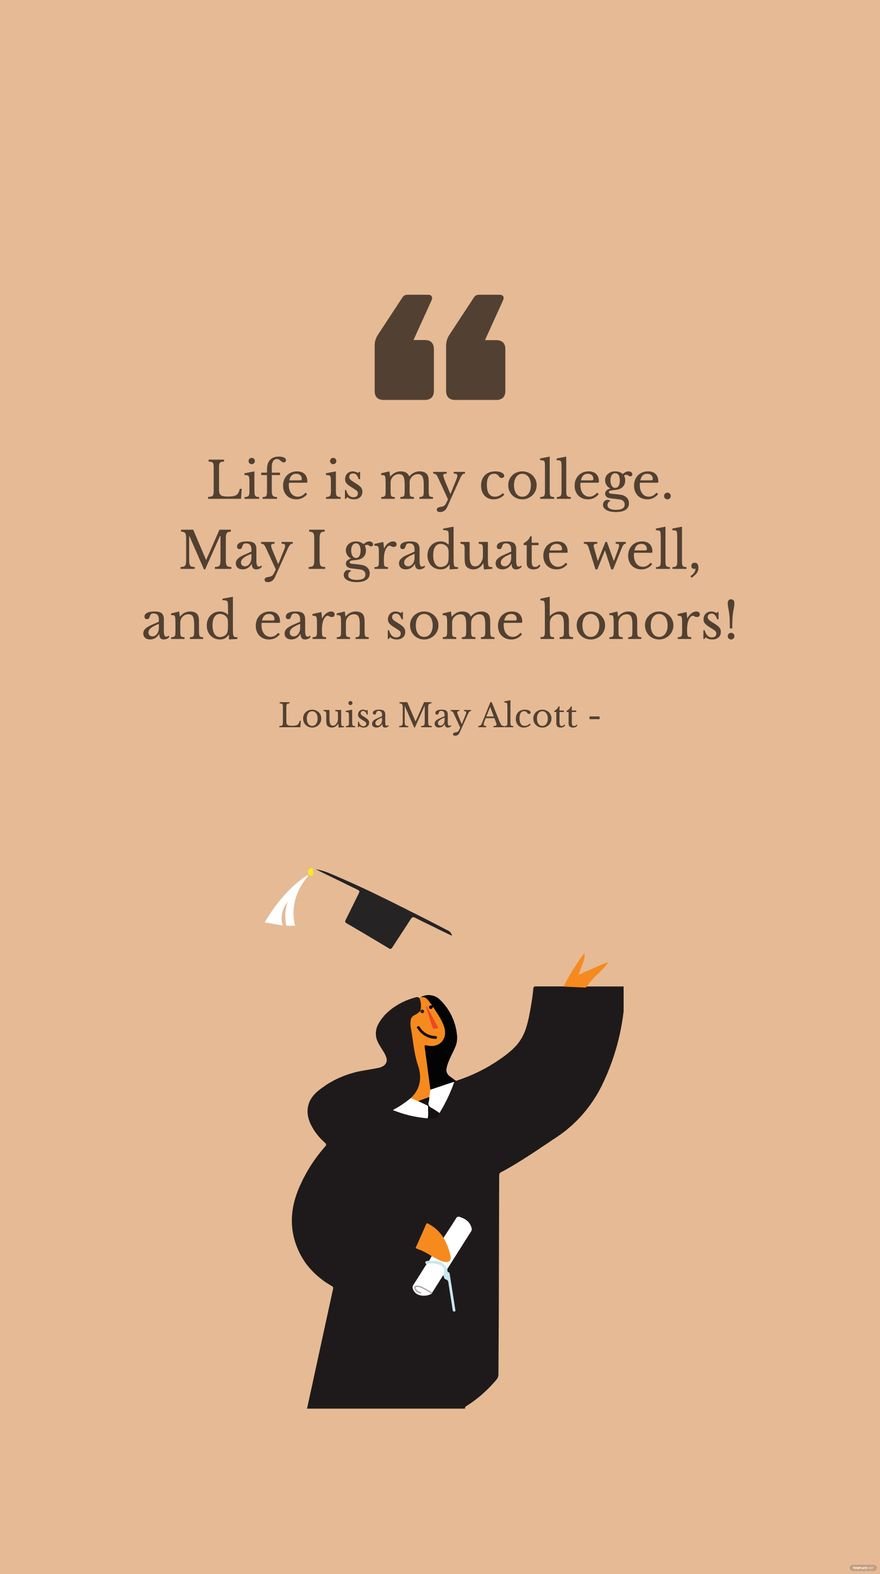 Free Louisa May Alcott - Life is my college. May I graduate well, and earn some honors! in JPG